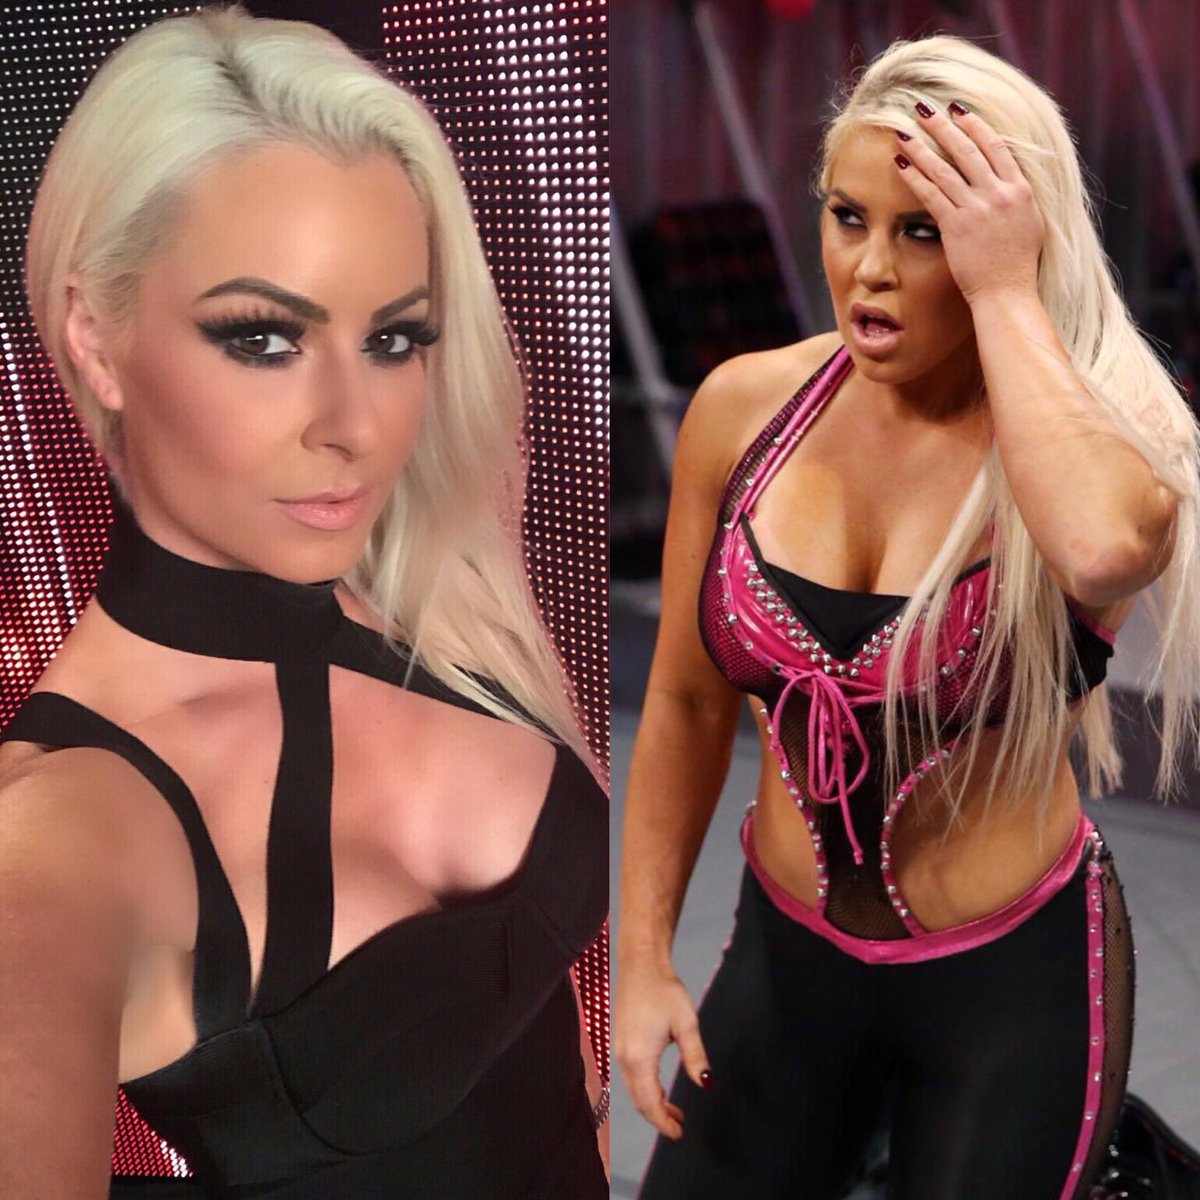 Who's hotter?RT for Maryse Like for Dana Brooke #WWEPayback #Payback.